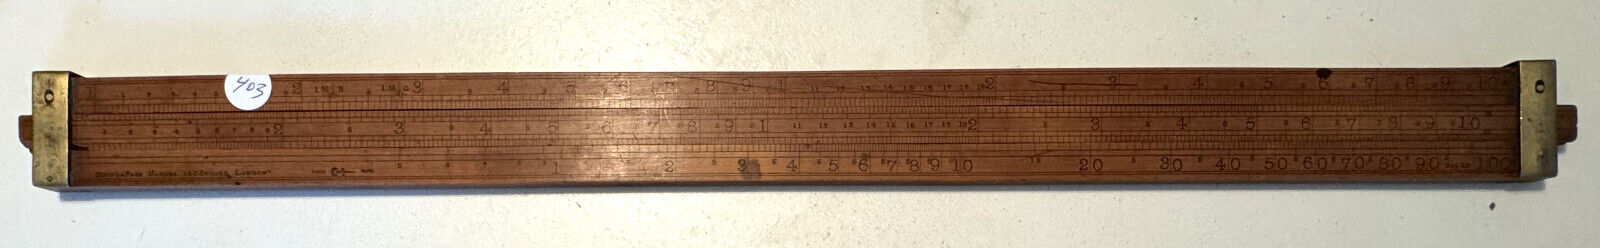 Antique Dring & Fage London INLAND REVENUE Brewers Boxwood 2 Foot Slide Rule 403